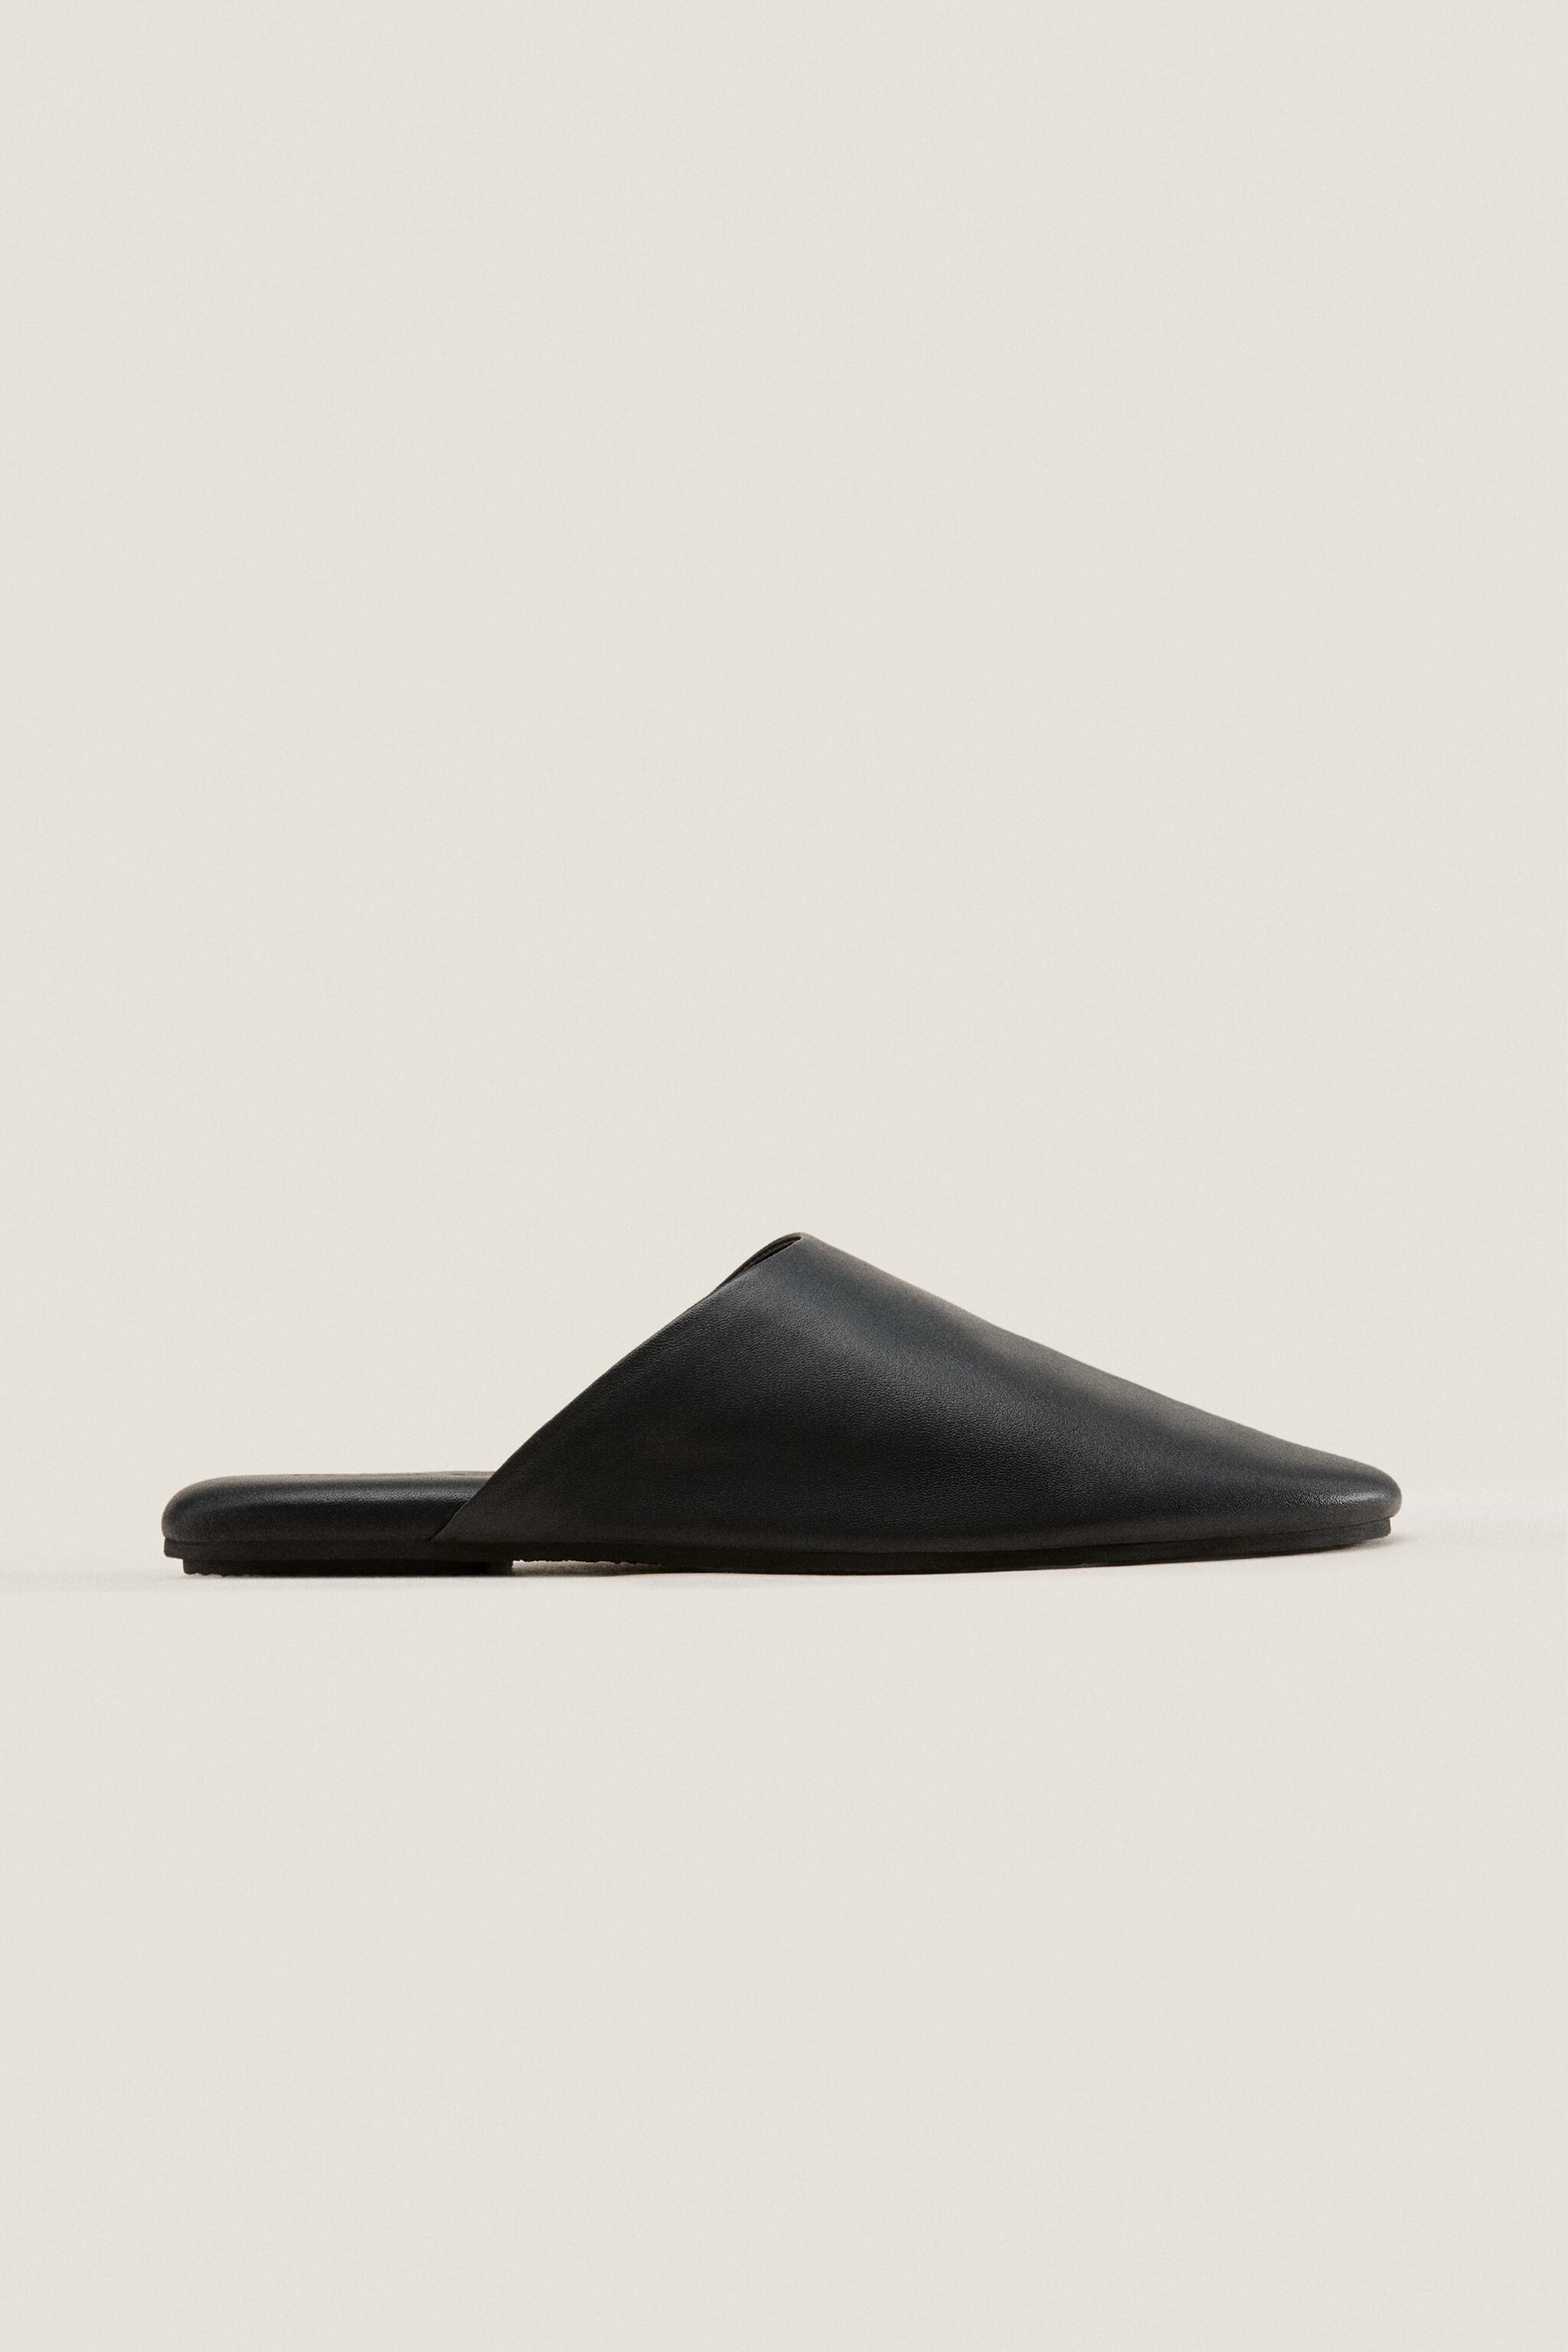 Zara SOFT LEATHER MULE SLIPPERS | Square One